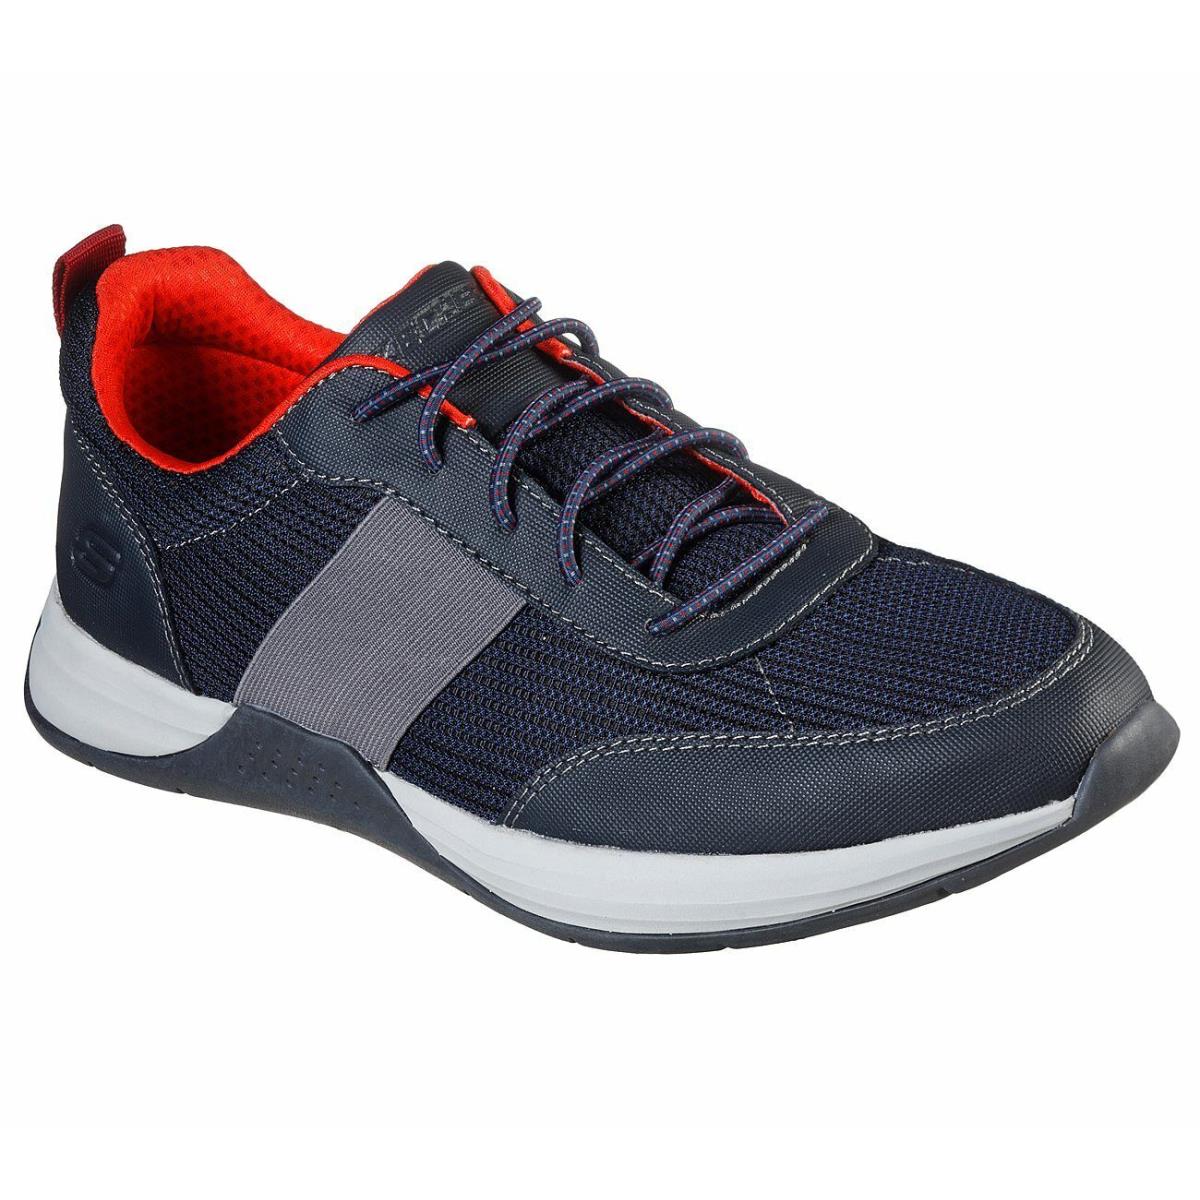 Men`s Skechers Evano Neslo Sporty Casual Shoes 210038 /nvy Multiple Sizes Navy